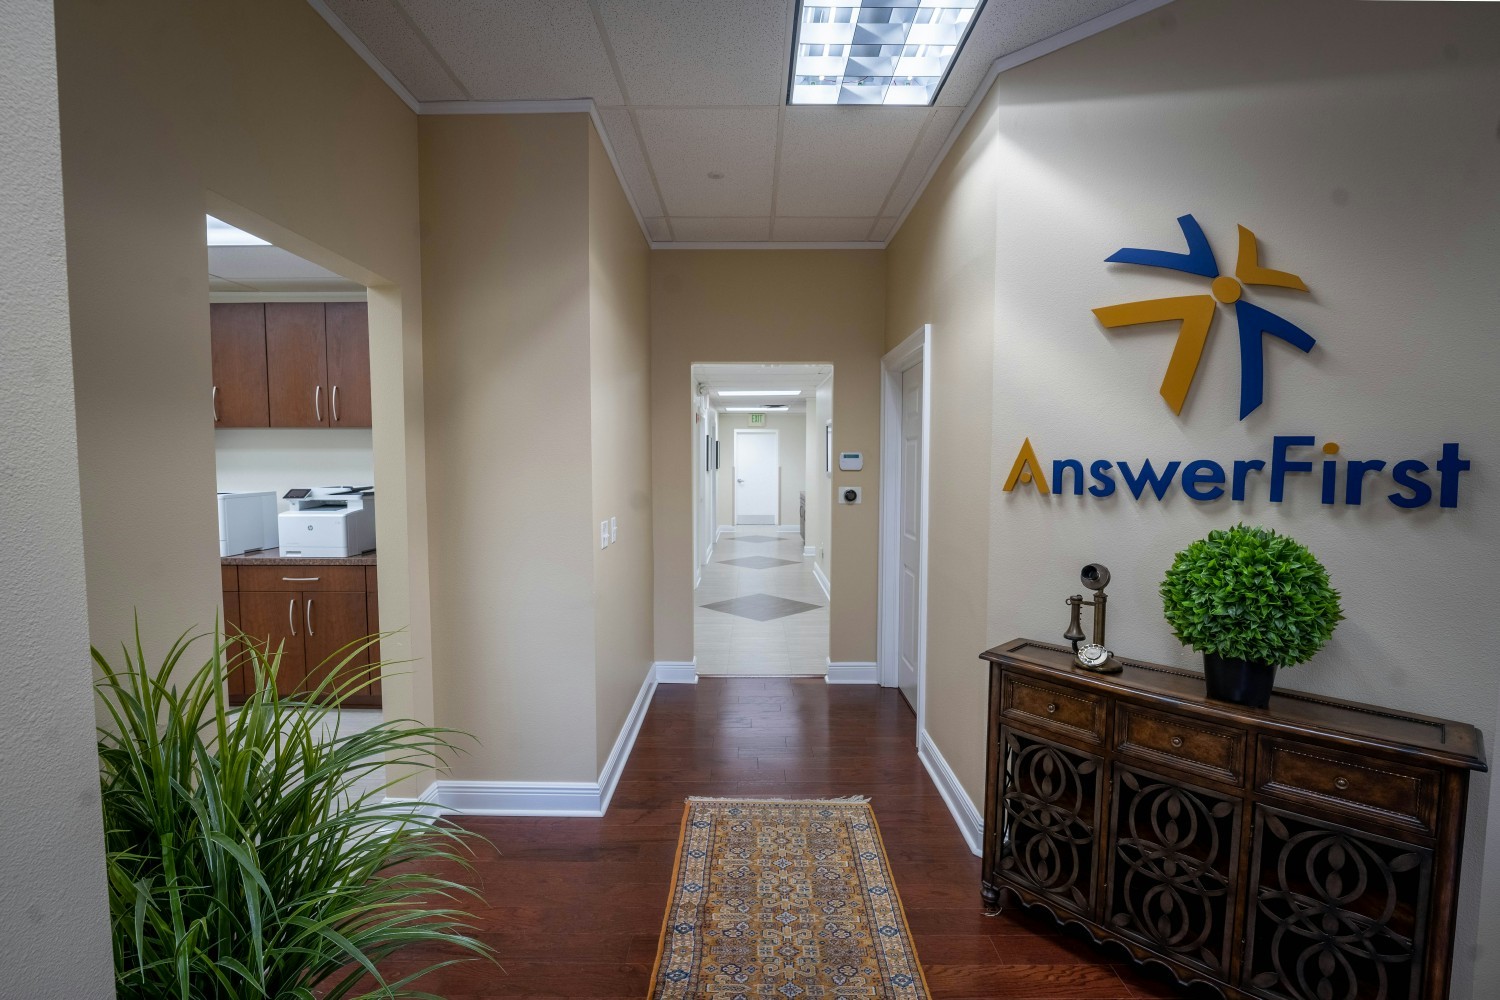 ANSWERFIRST CORPORATE OFFICE IN TAMPA, FL
